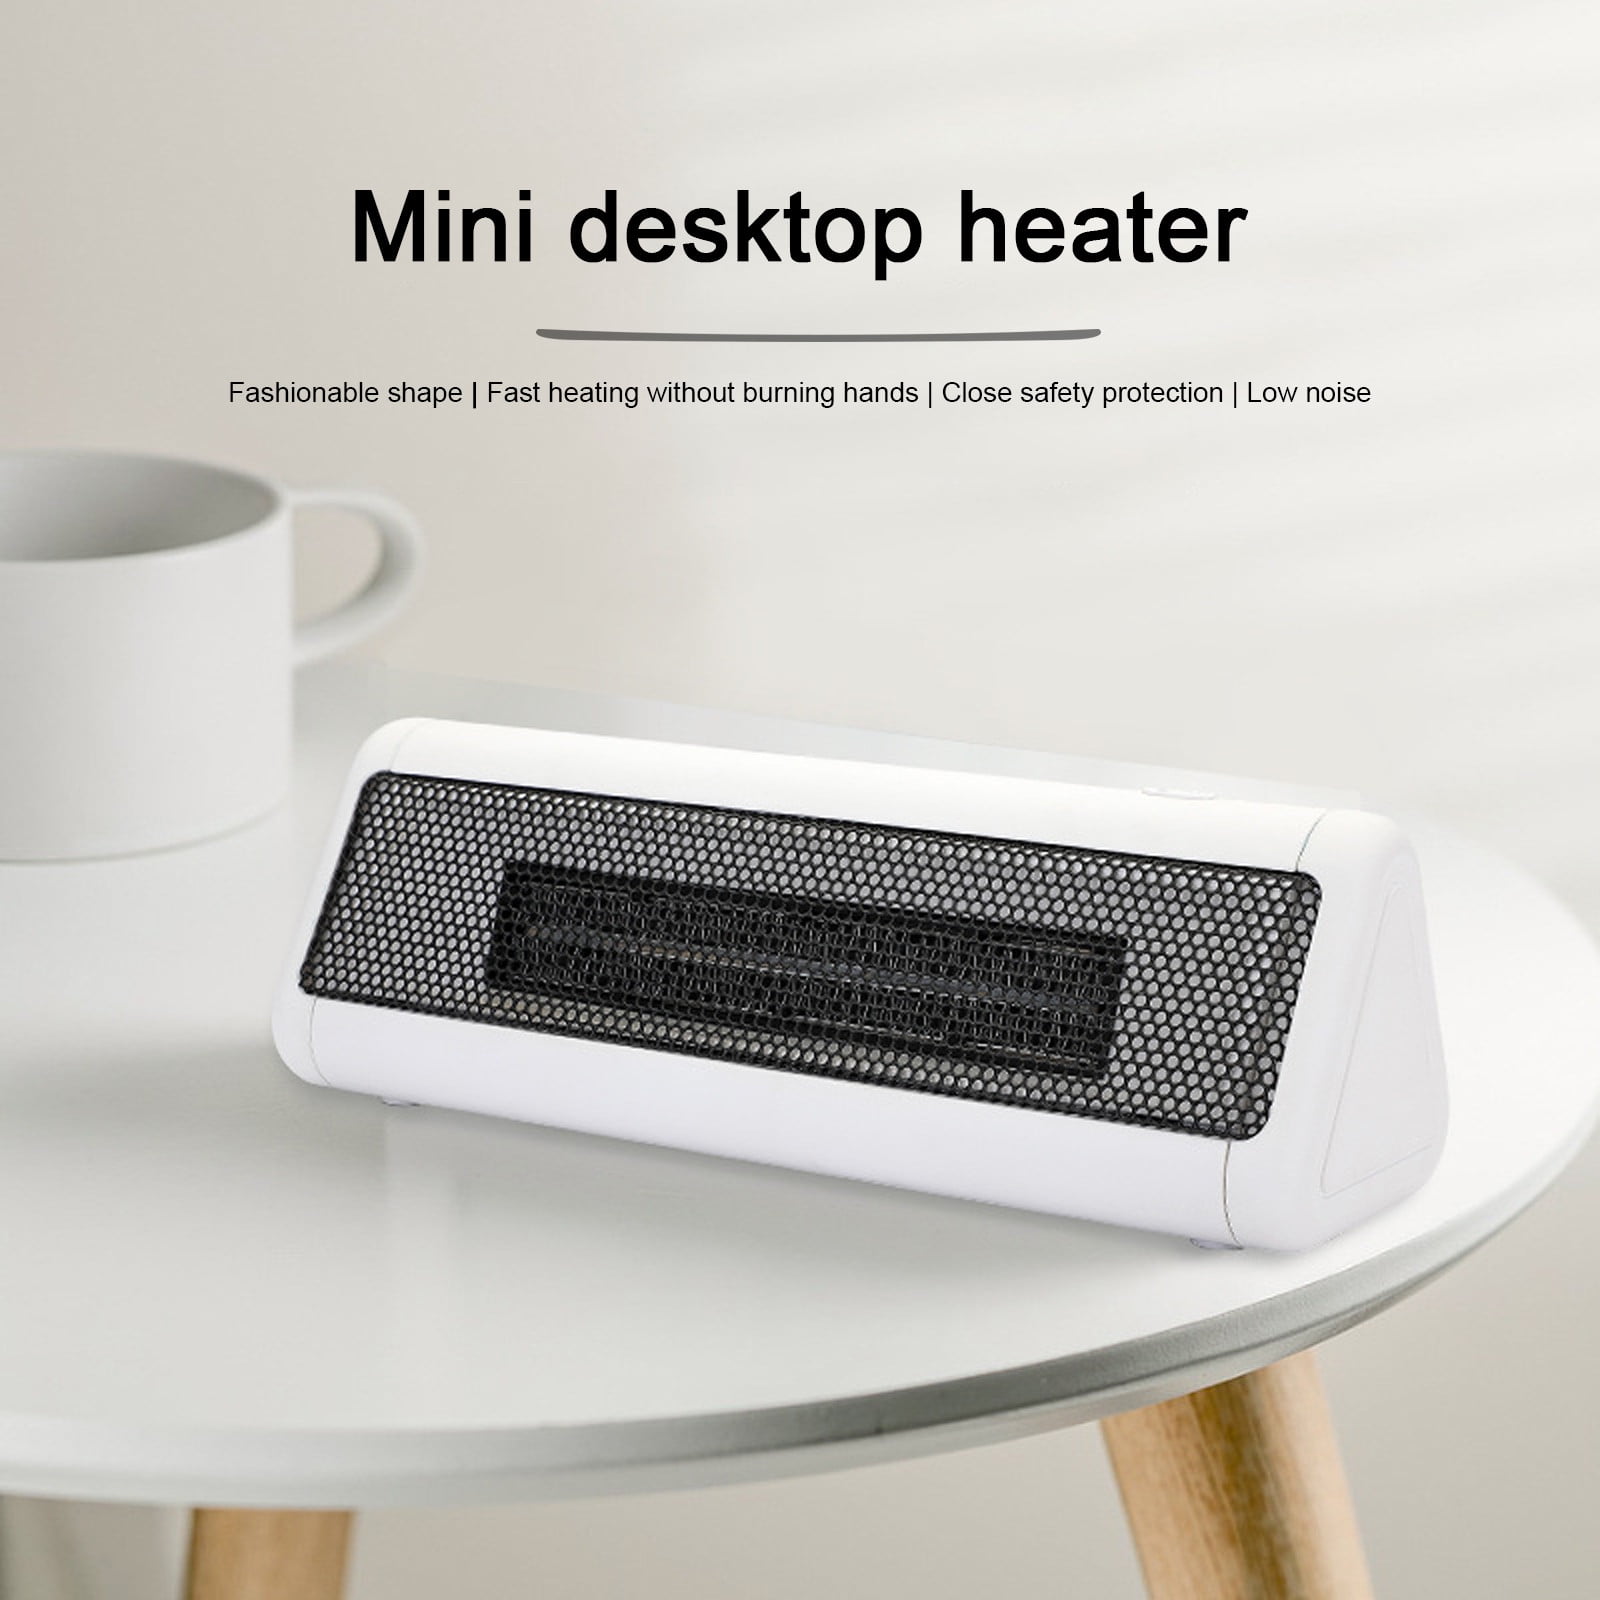 Nauttxon Desk Heater for Office 330W - 2 in 1 Monitor Stand Desk Heater  with Timer 2 Heat Levels USB Ports - Personal Desktop Heater Quiet,  Keyboard